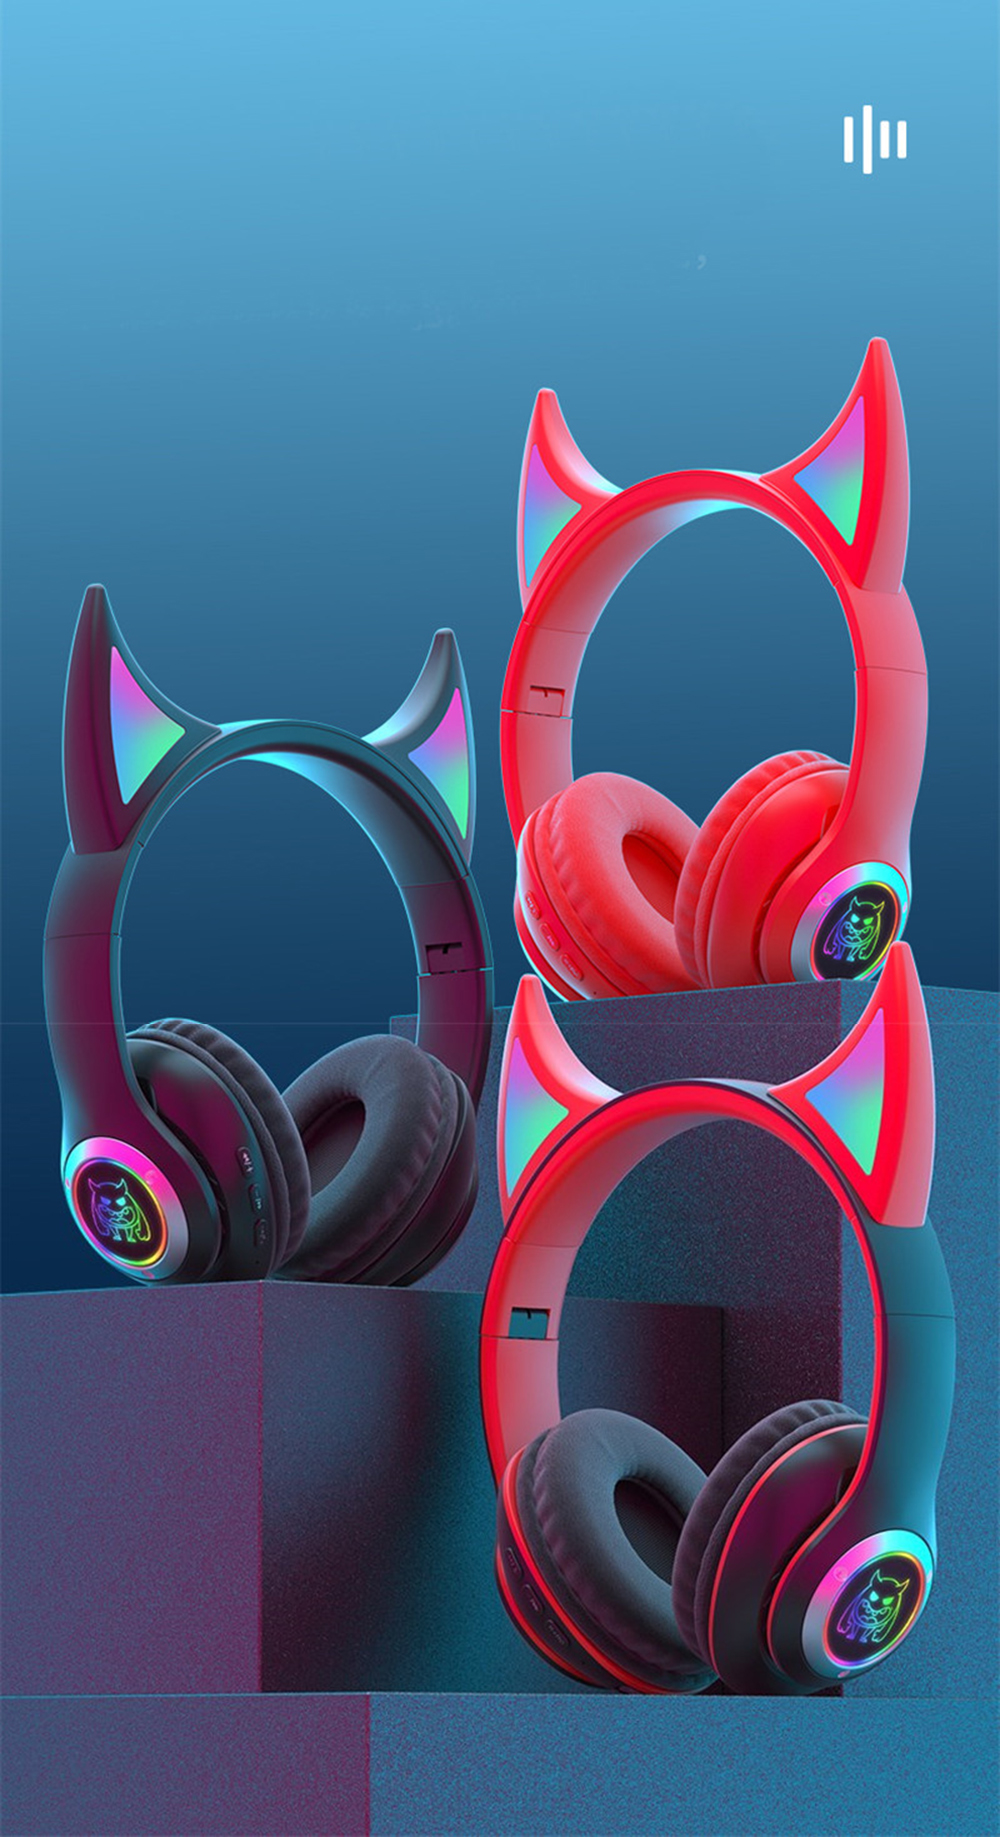 CR-STN-29-Devils-Horn-Headset-Wireless-BT50-HIFI-Stereo-Sound-IPX5-Noise-Canceling-Colorful-RGB-Back-1918949-11